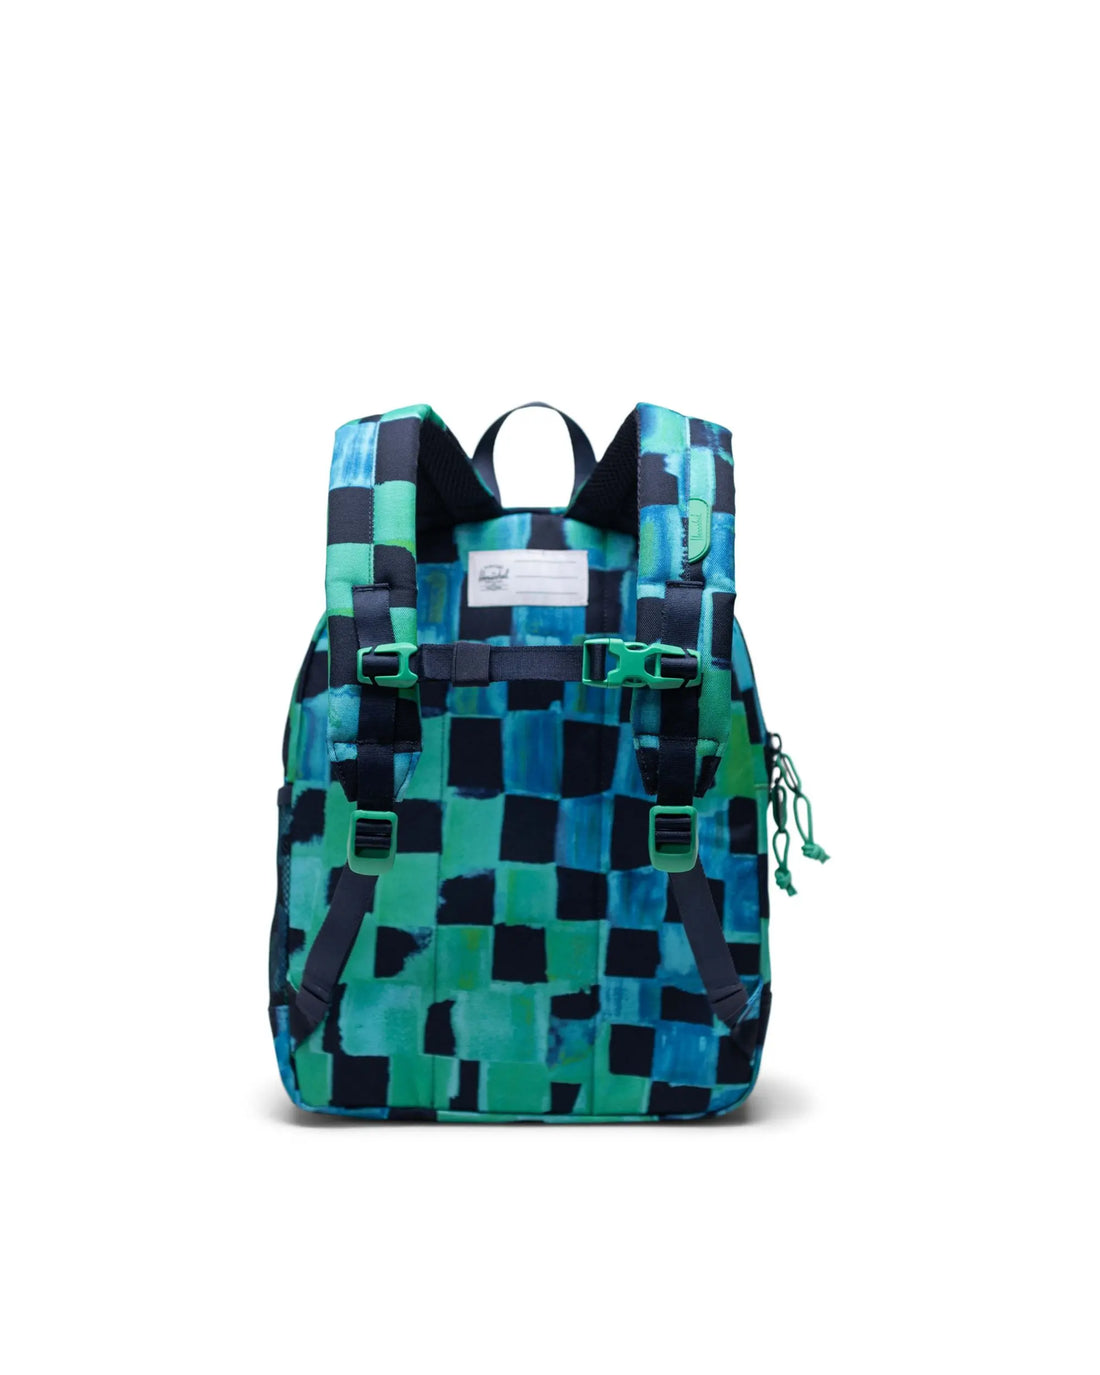 Herschel Heritage Backpack | Youth 26L - Painted Checker